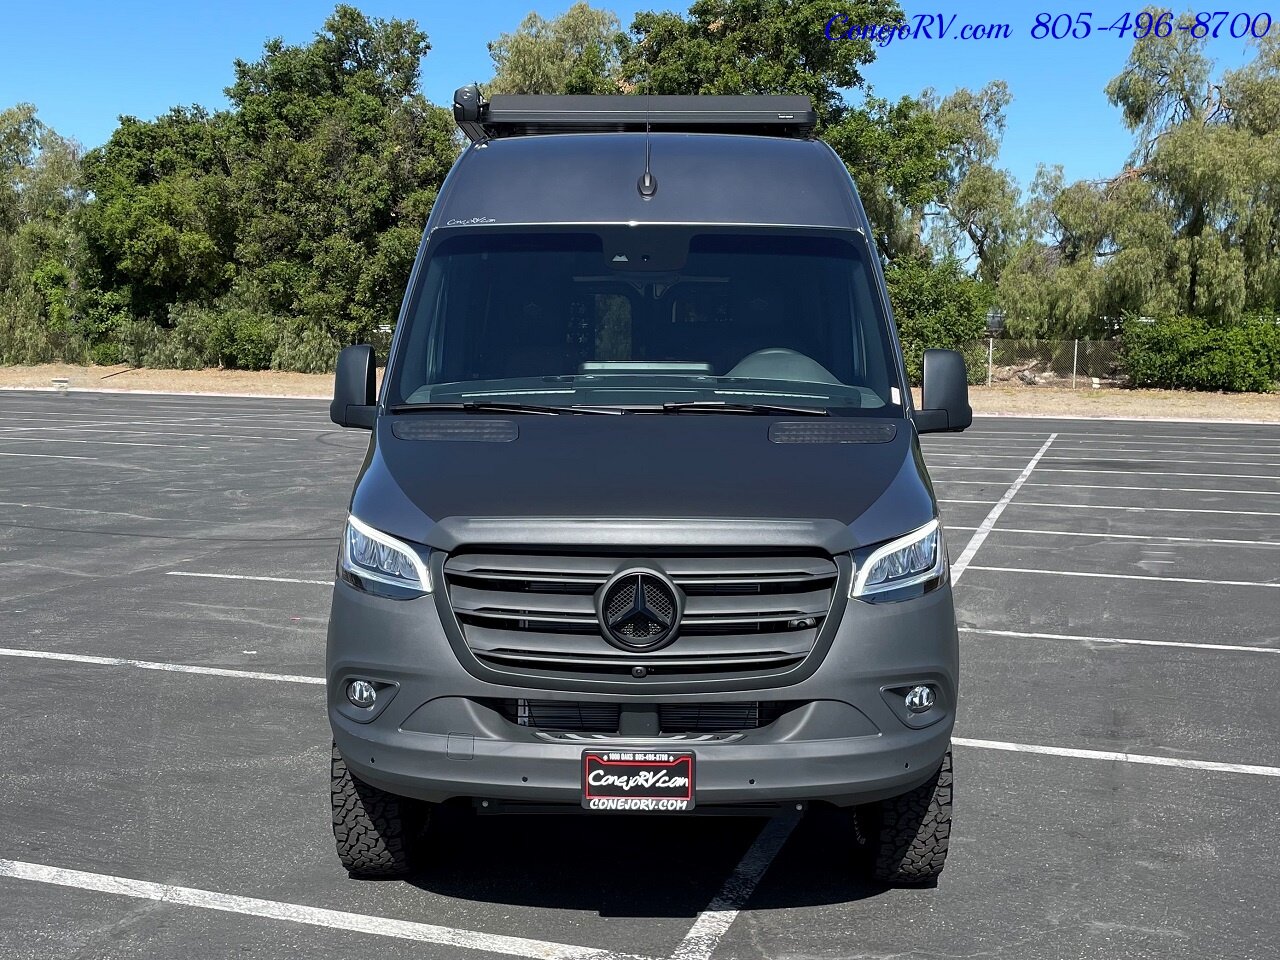 2023 Storyteller Overland Stealth Mode AWD DEALER DEMO 4 cyl H.O.with 9 Speed  Transmission - Photo 41 - Thousand Oaks, CA 91360